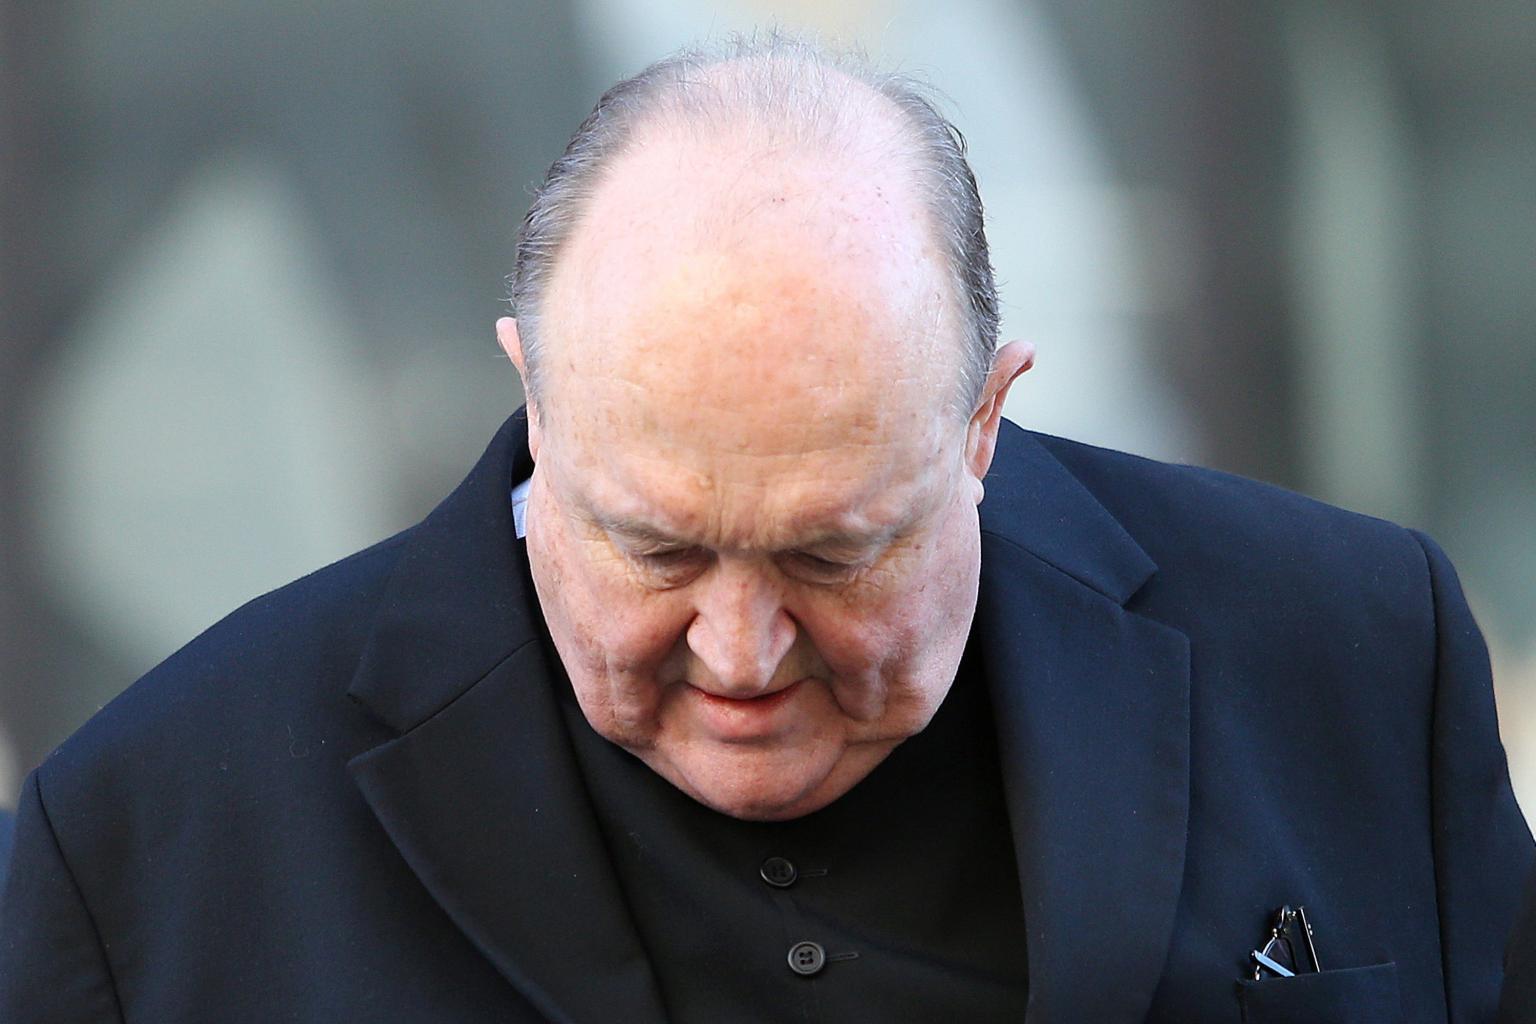 Australian archbishop steps aside after conviction for concealing child sex abuse